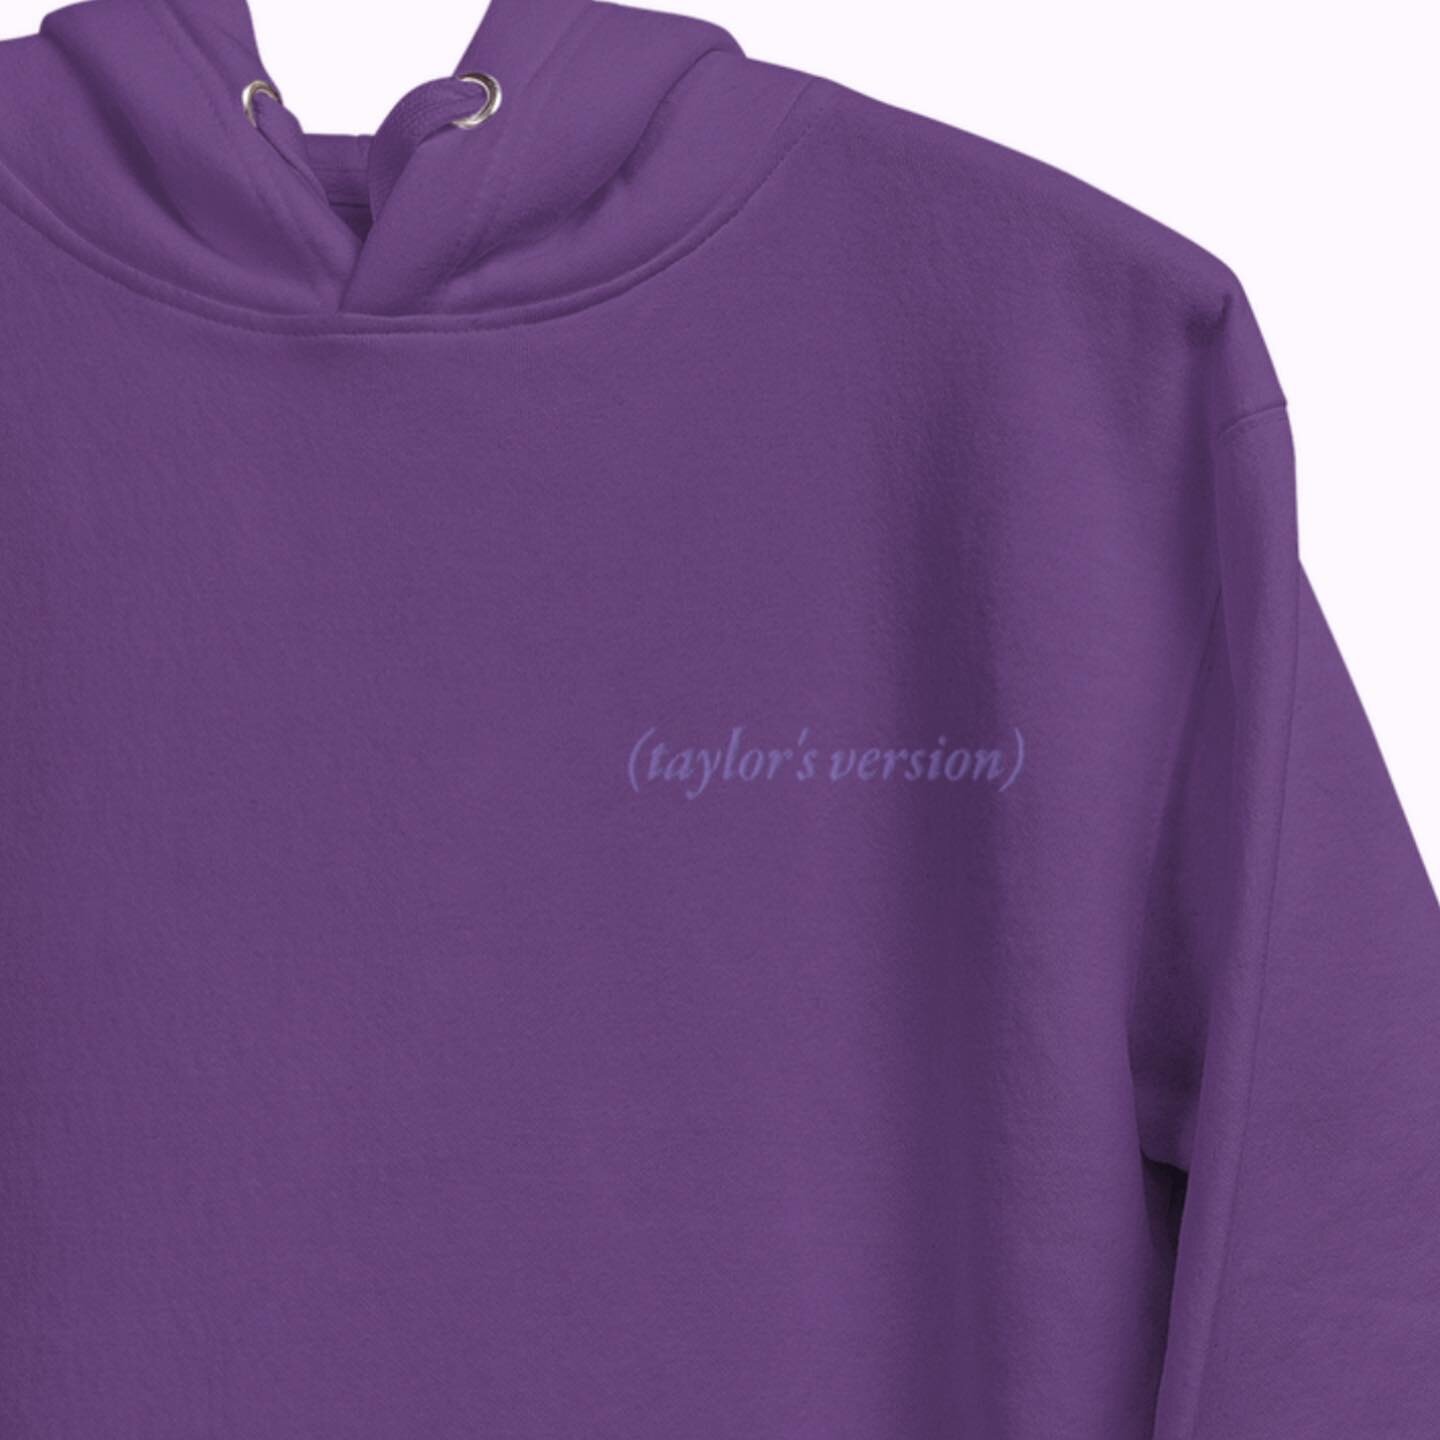 Today is the last day to order on ErasOutfits.com for Christmas delivery! I just got myself a purple Taylor&rsquo;s Version embroidered hoodie (because Speak Now TV is coming&hellip; right??!) and a long sleeved Varsity Swiftie T-shirt to wear all th